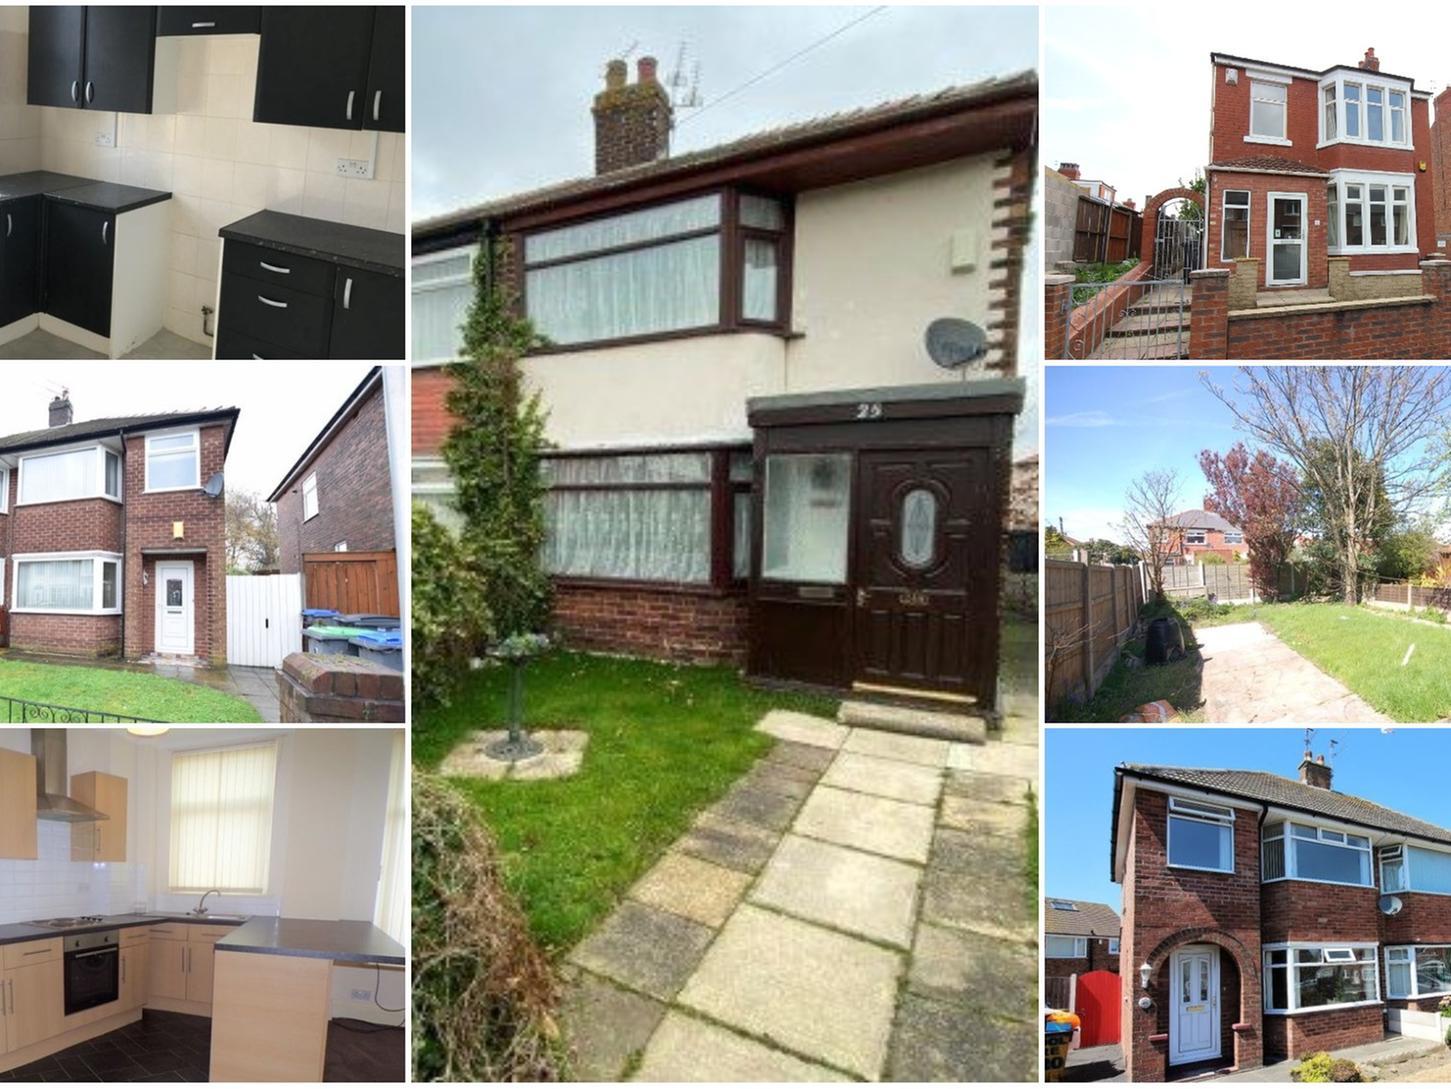 These are the 10 most viewed properties to rent in Blackpool according to Zoopla